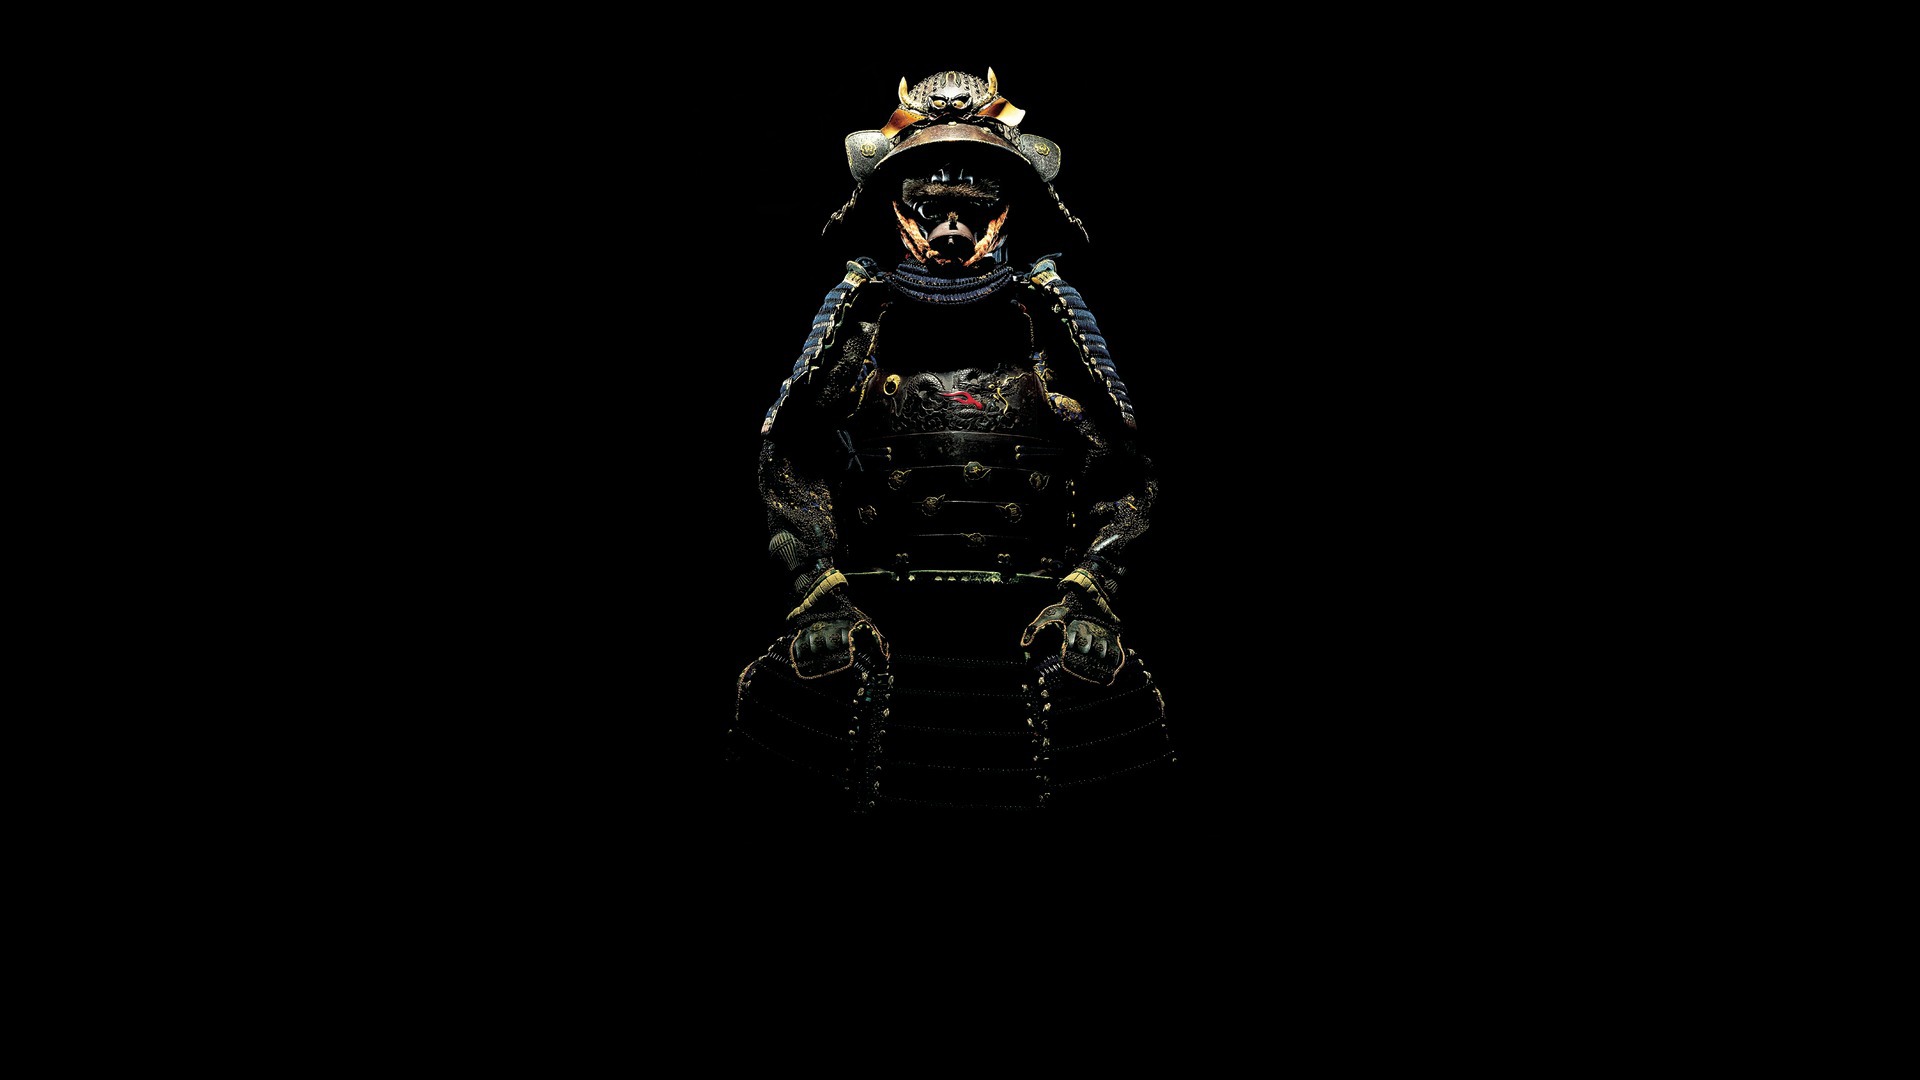 Samurai On A Black Background Wallpaper And Image